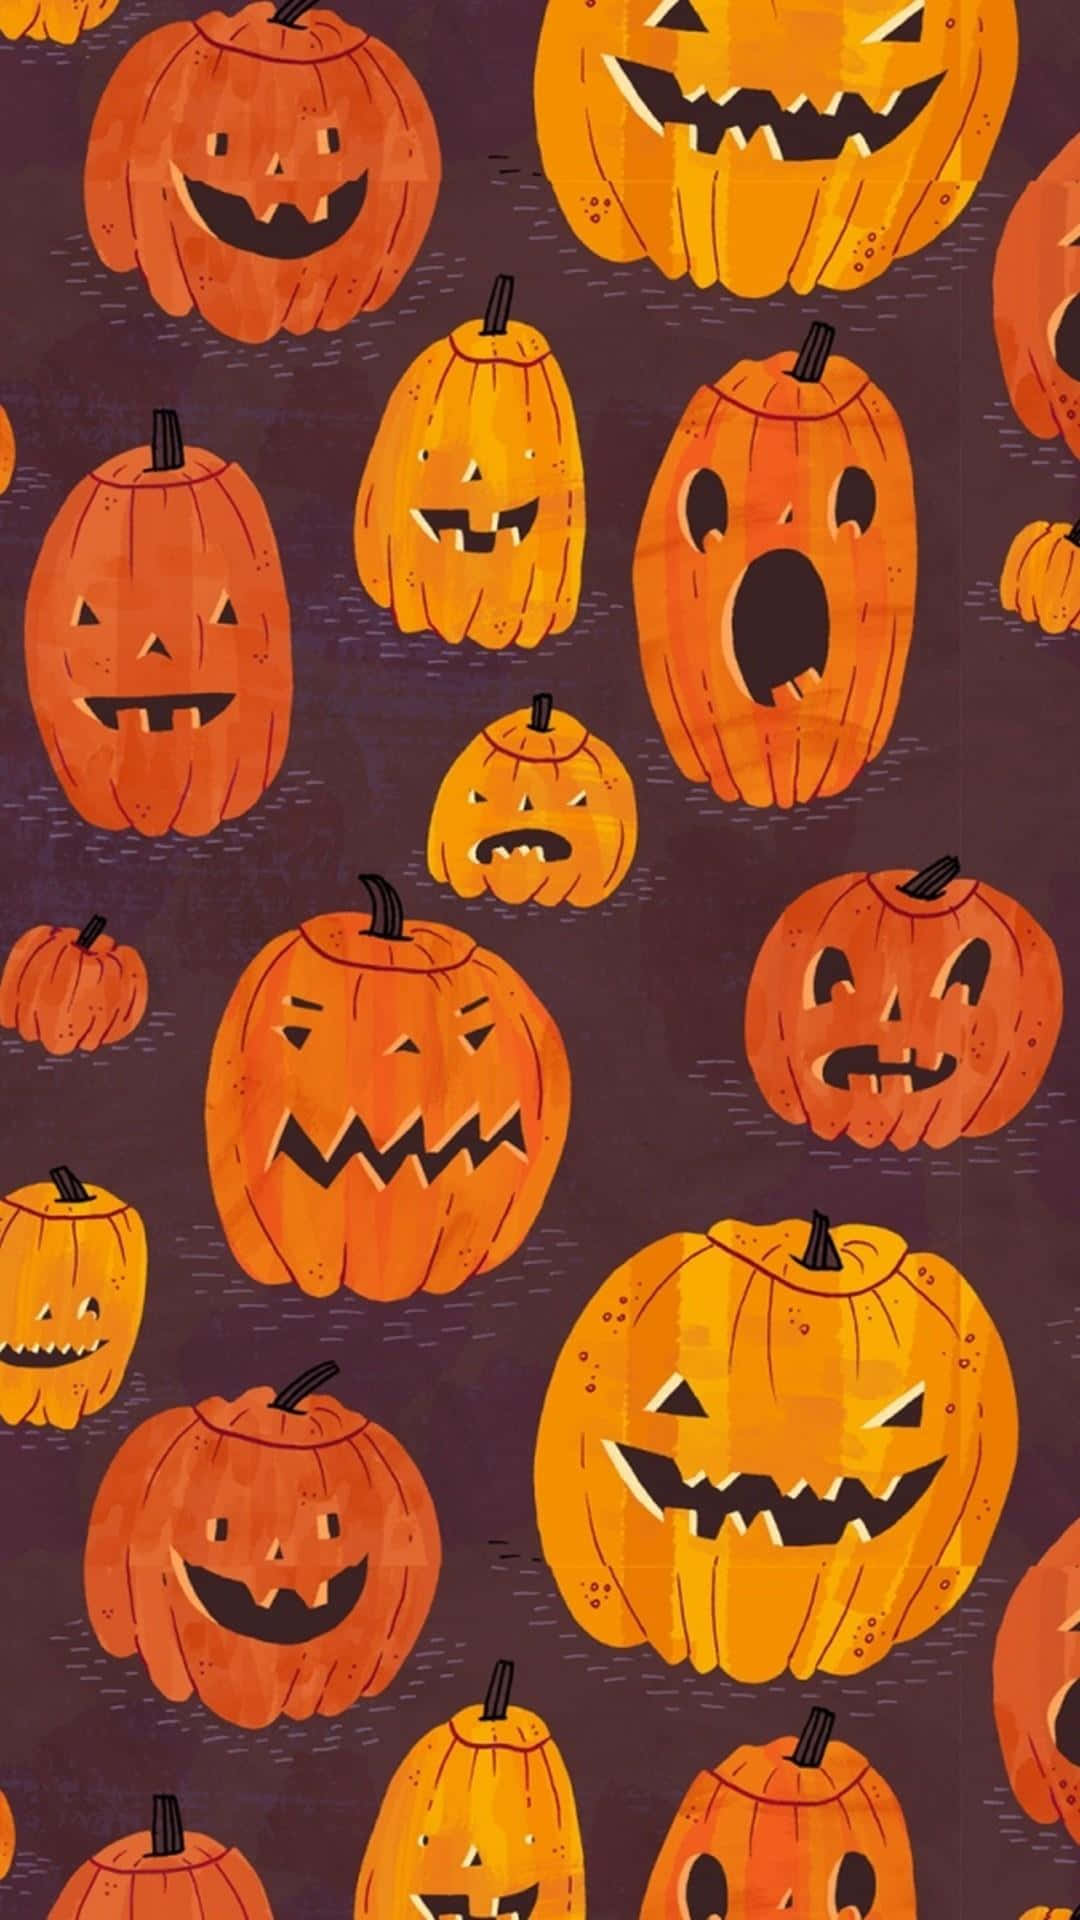 Spice up your Halloween with these cute and spooky iPhone wallpapers